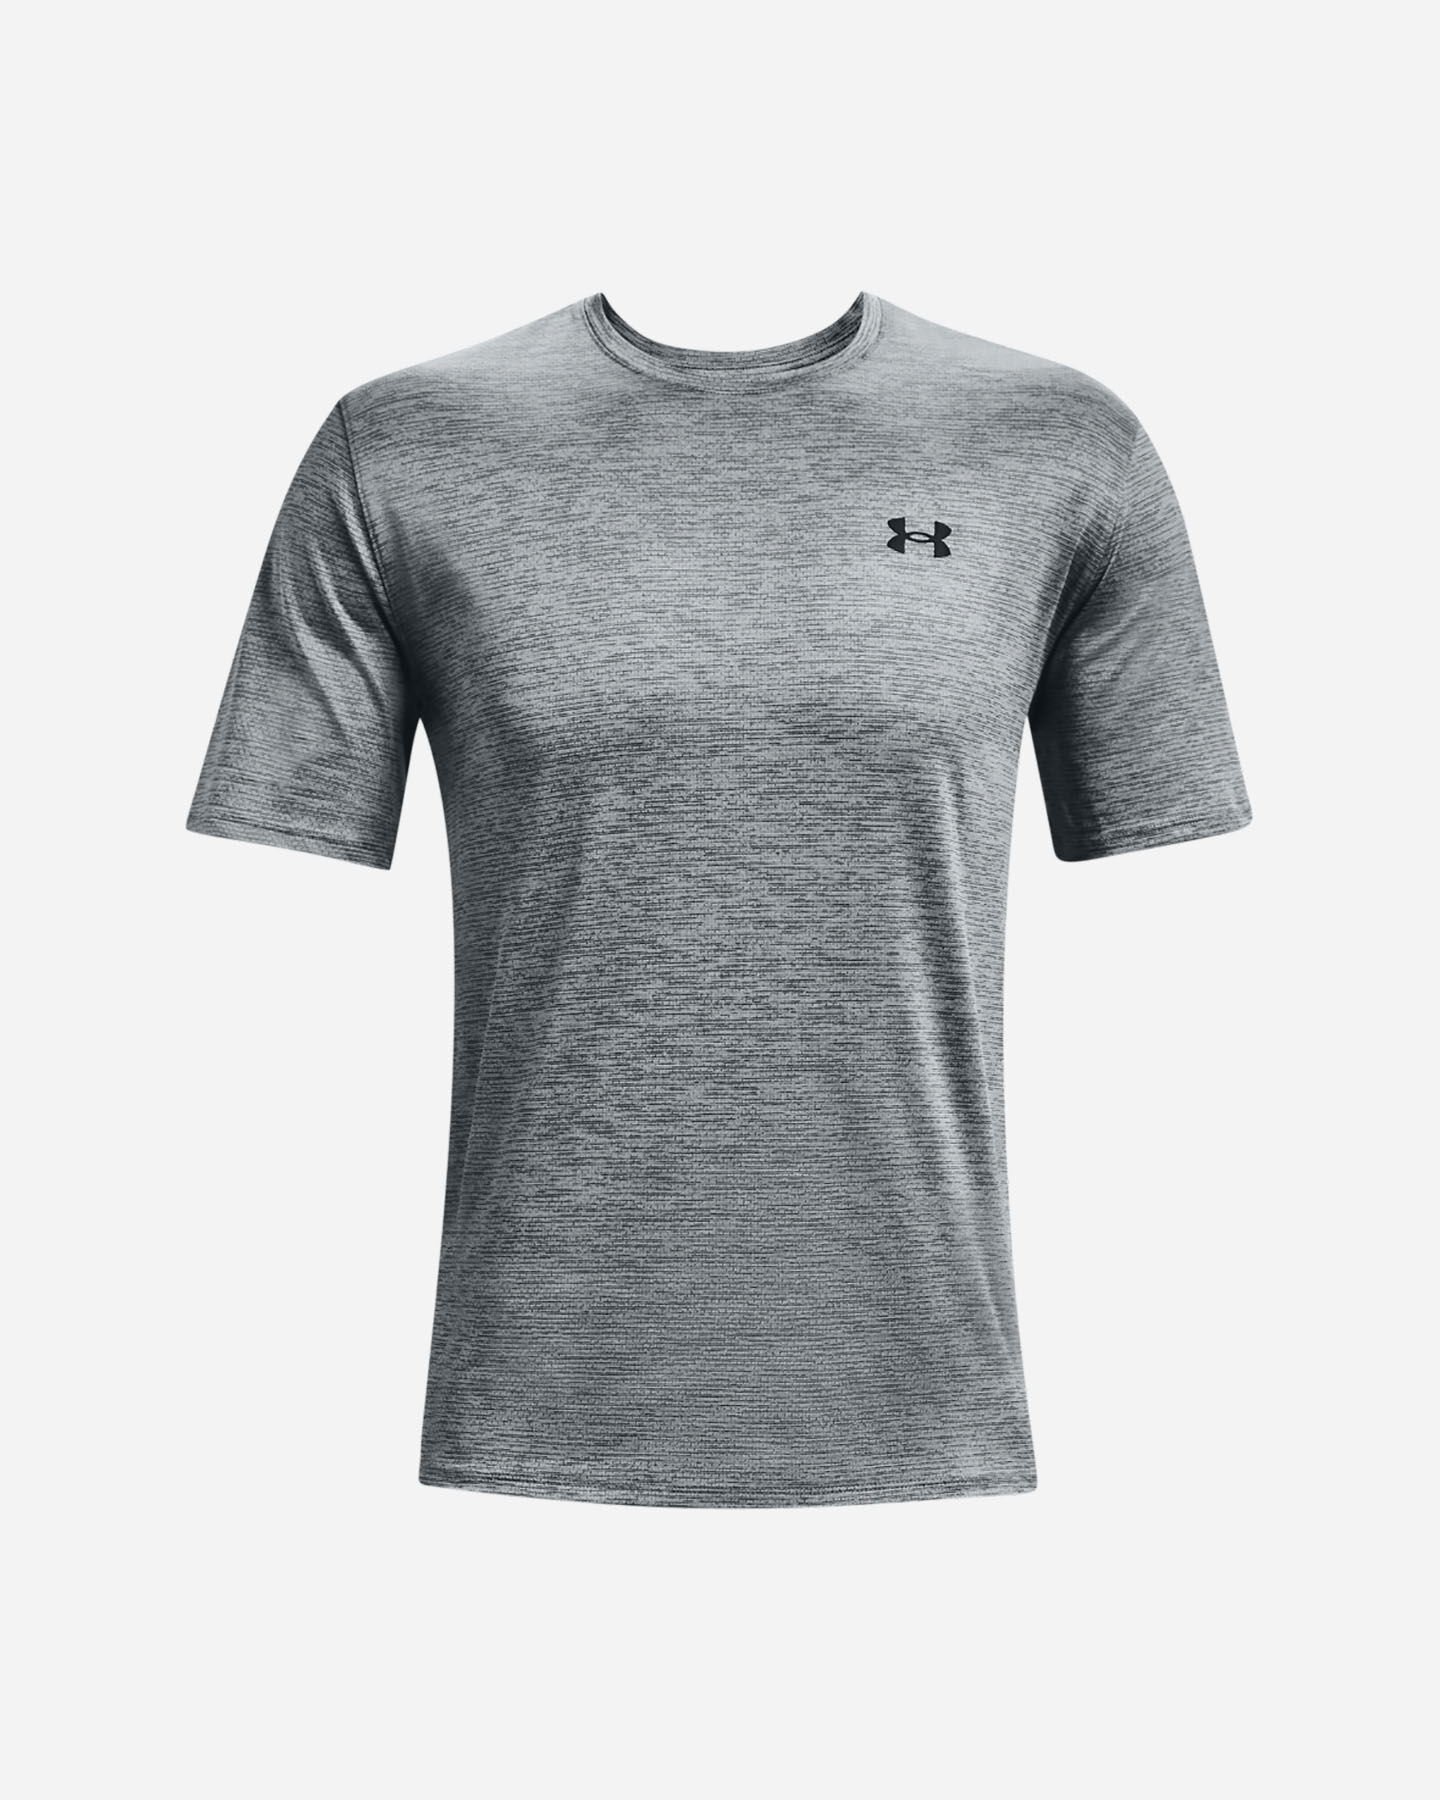  T-Shirt training UNDER ARMOUR TRAINING VENT 2.0 M S5287160|0012|SM scatto 0